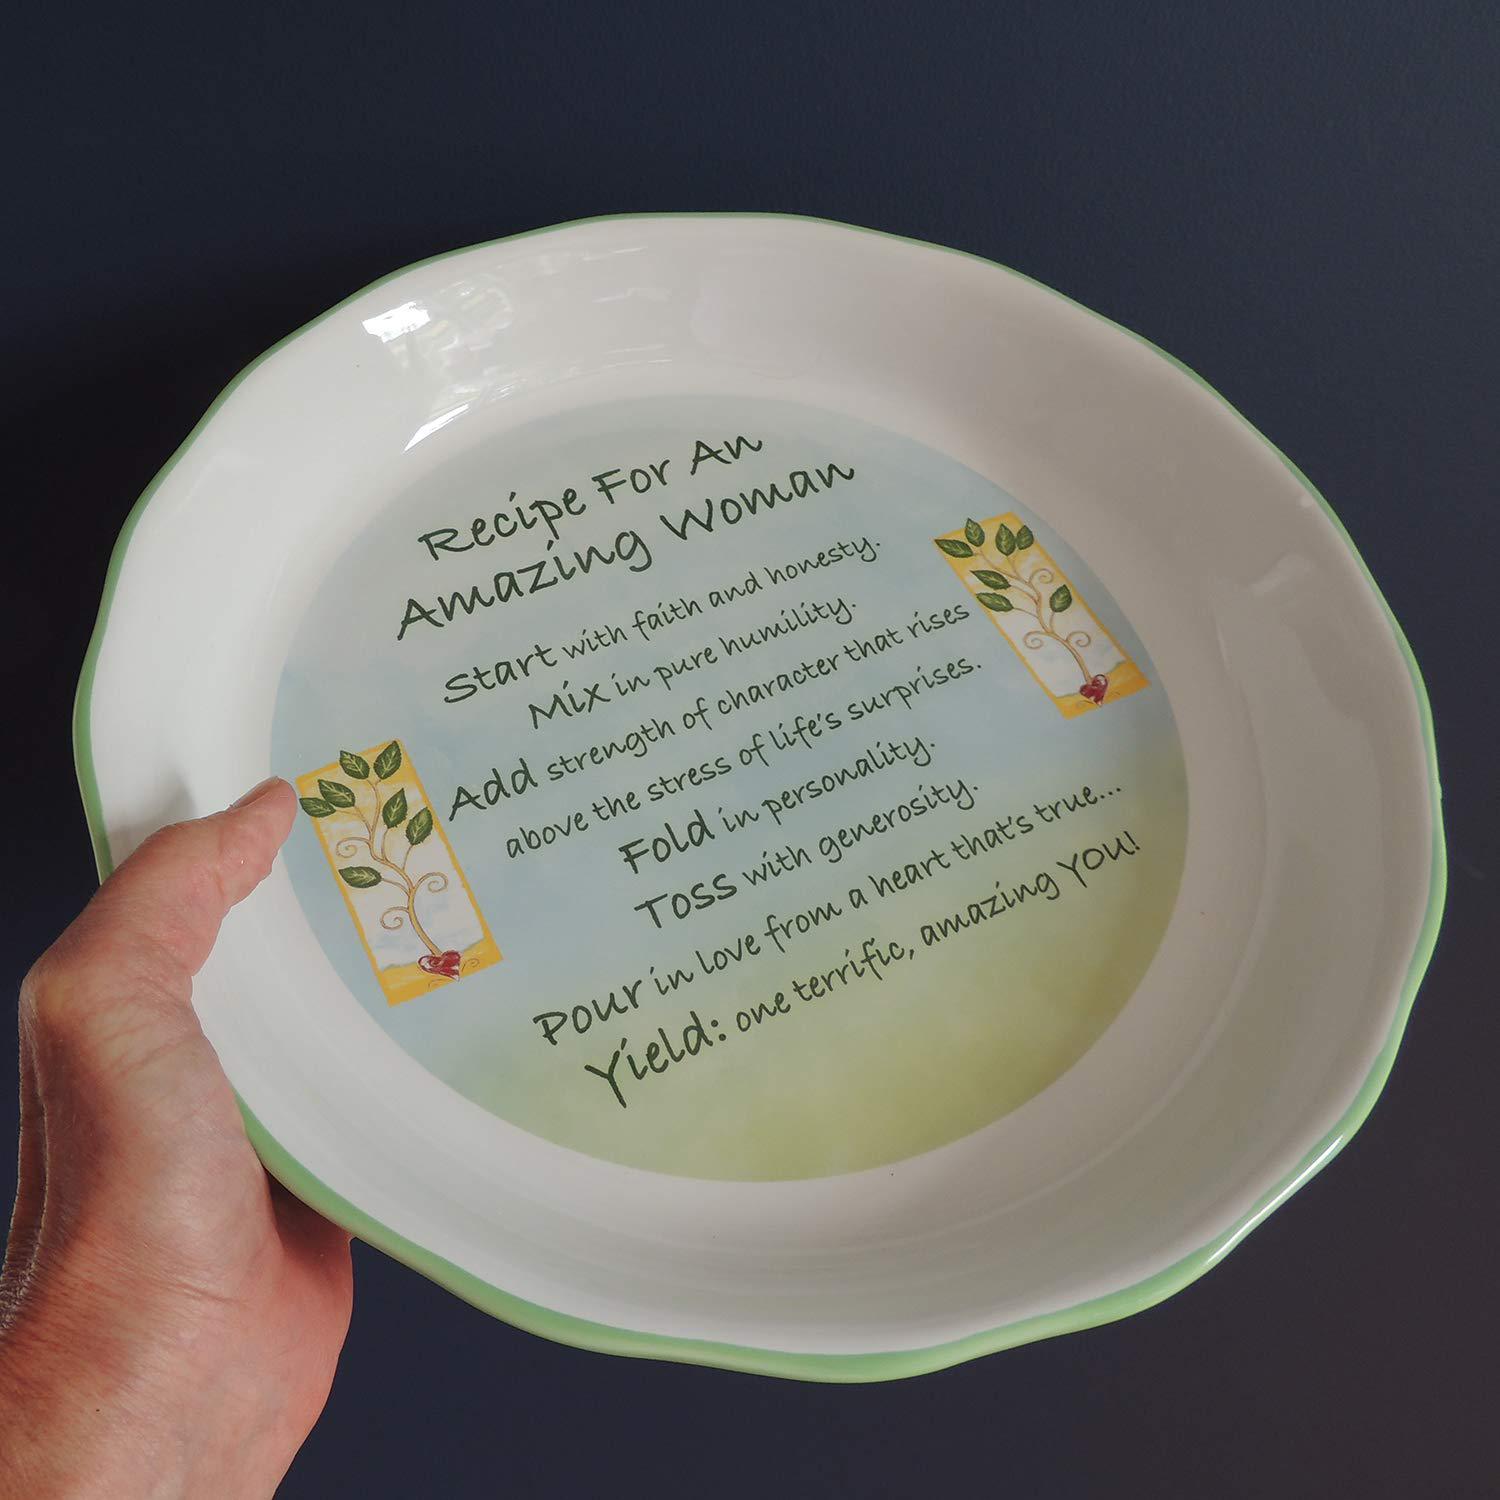 abbey gift abbey & ca gift amazing woman pie plate, 10.5", green